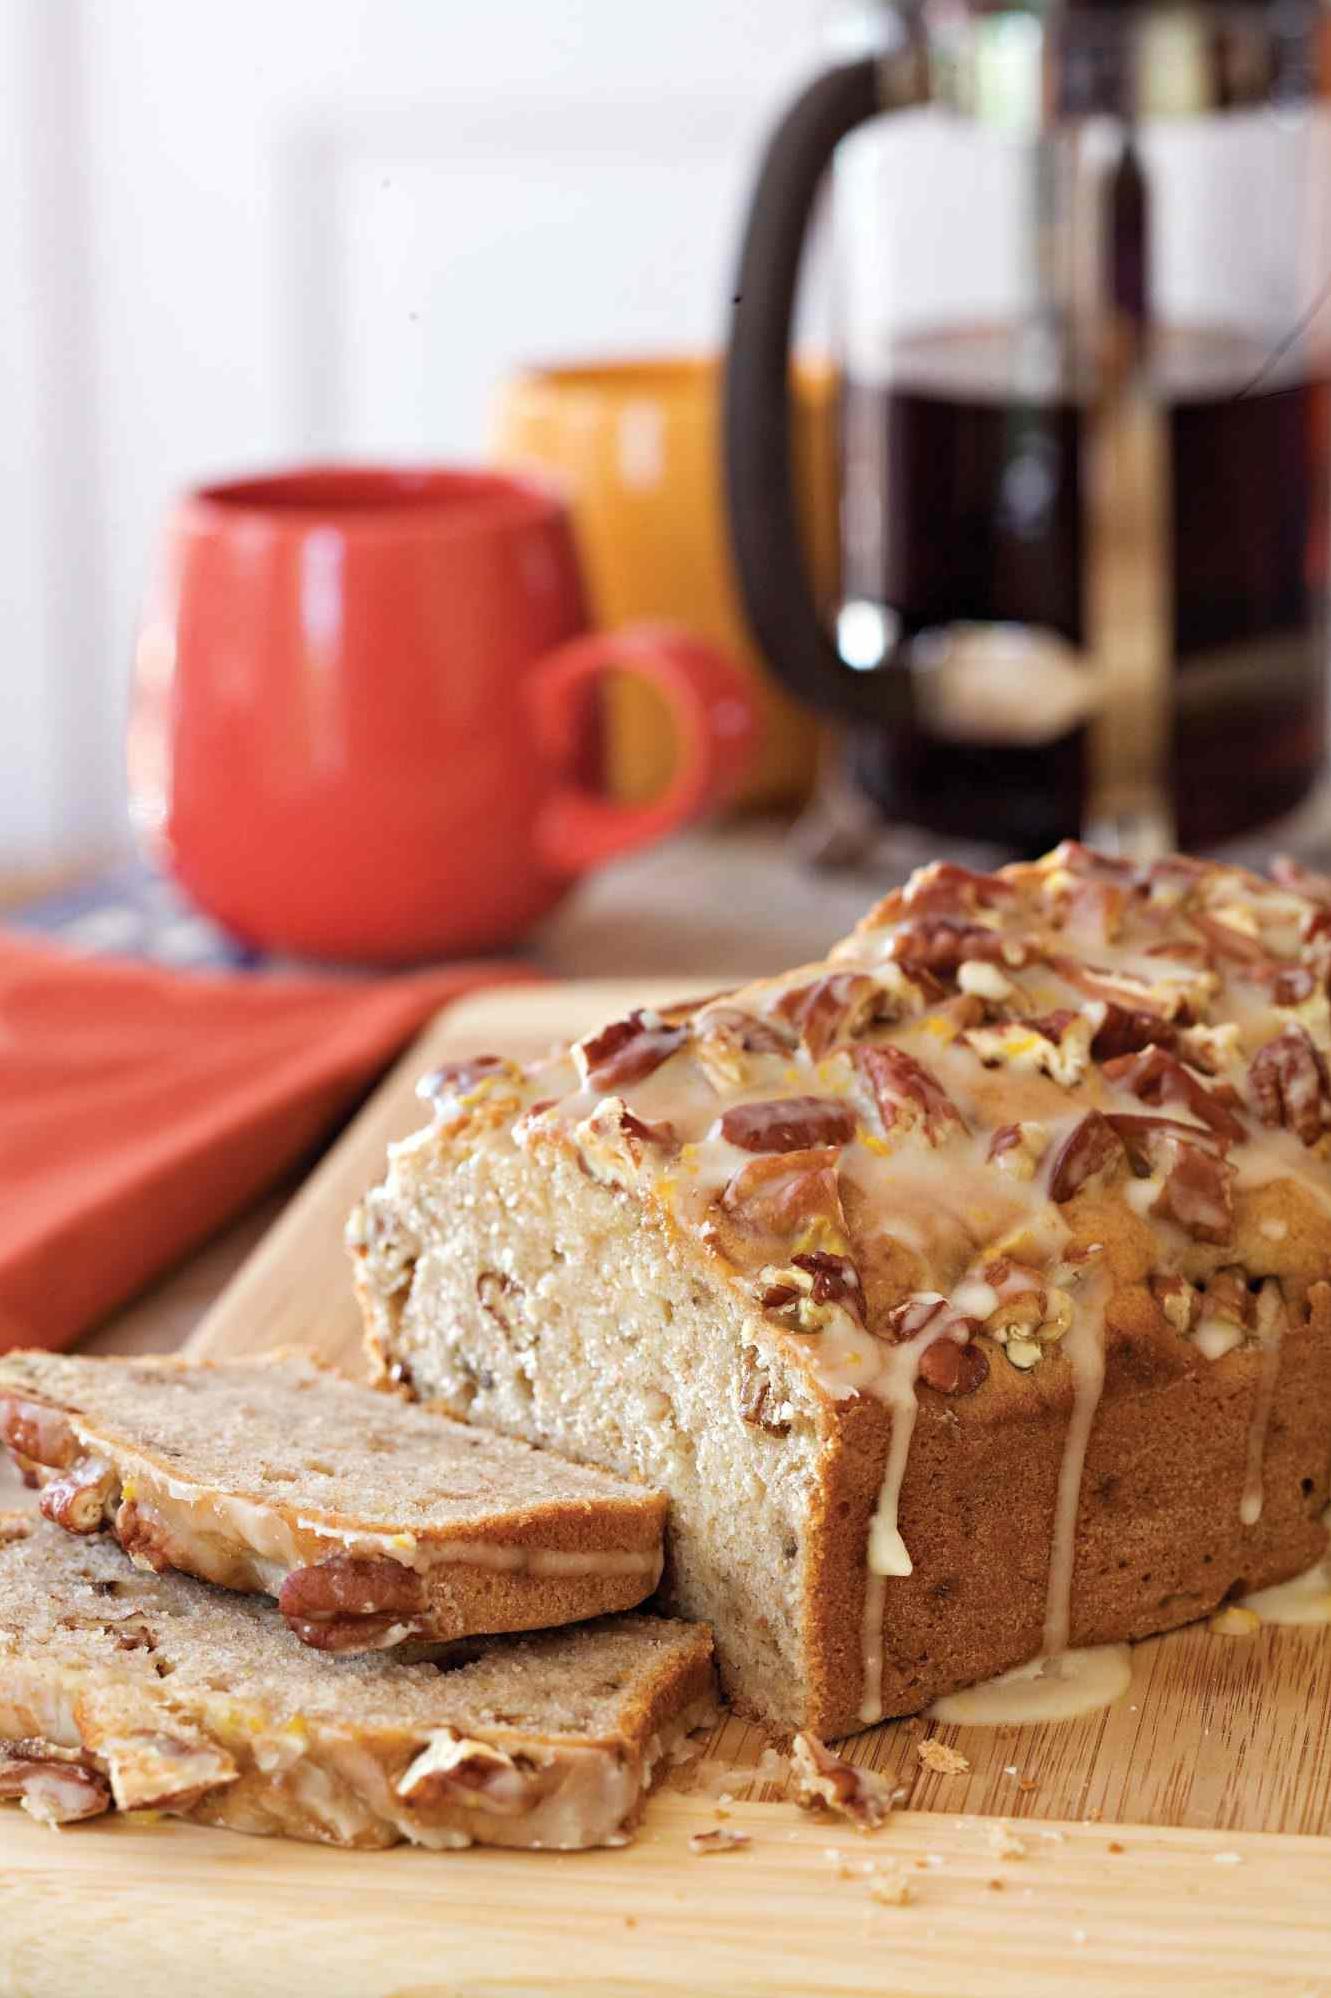 Southern Living's Toasted Coconut Cream Cheese Banana Nut Bread